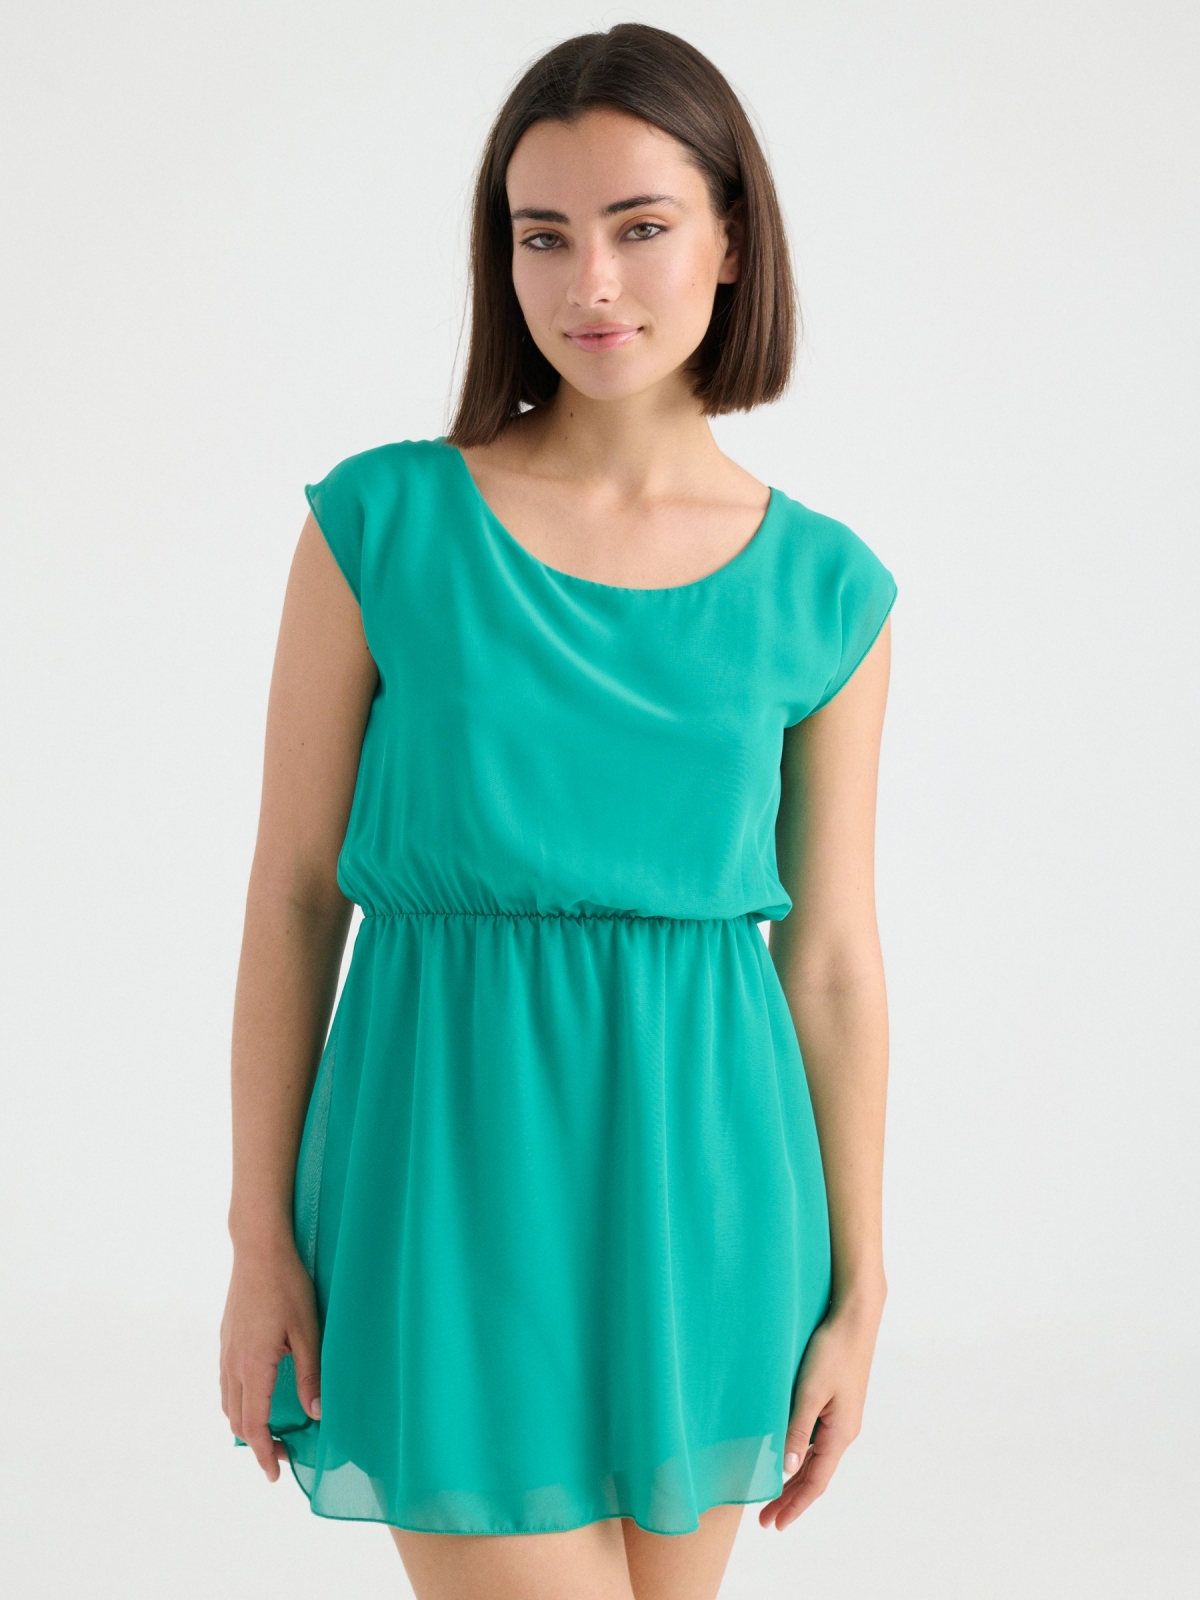 Elastic waist dress green middle front view